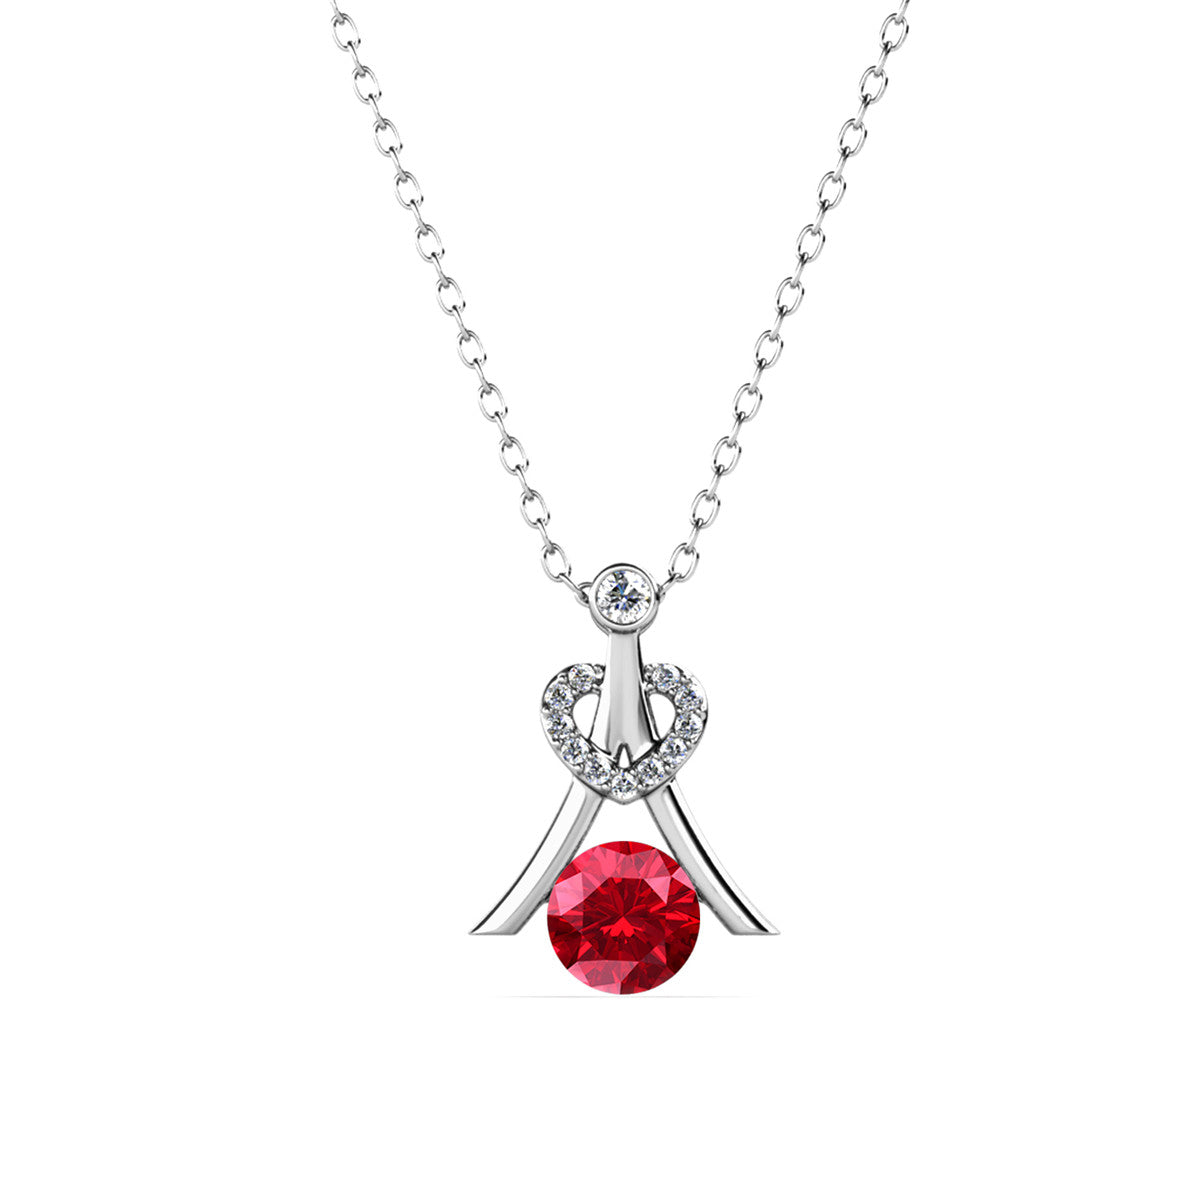 Serenity July Birthstone Ruby Necklace, 18k White Gold Plated Silver Necklace with Round Cut Crystals